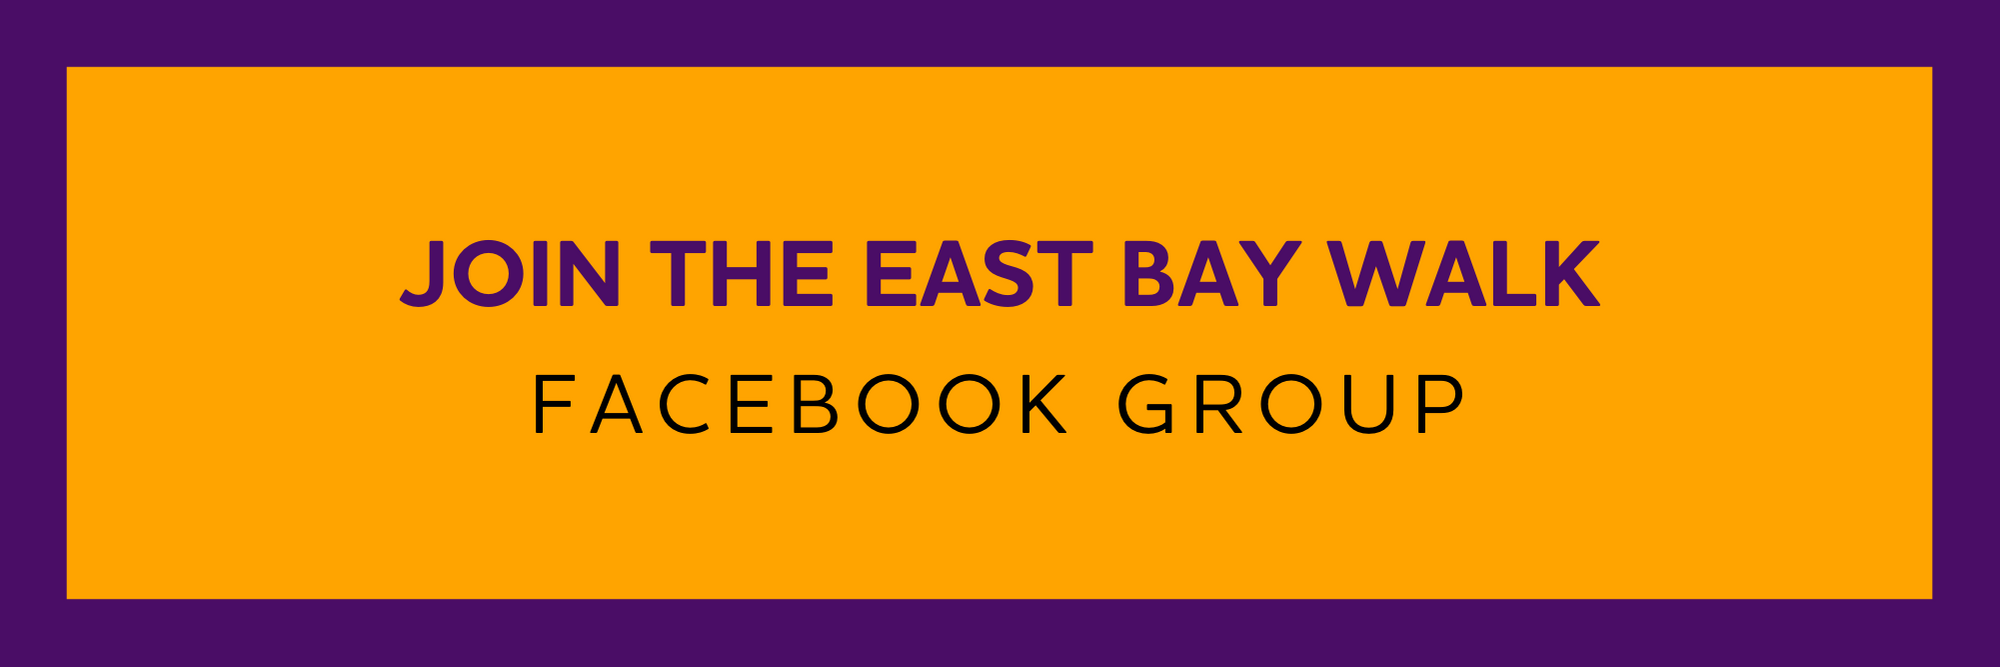 East Bay Website Banners (2).png